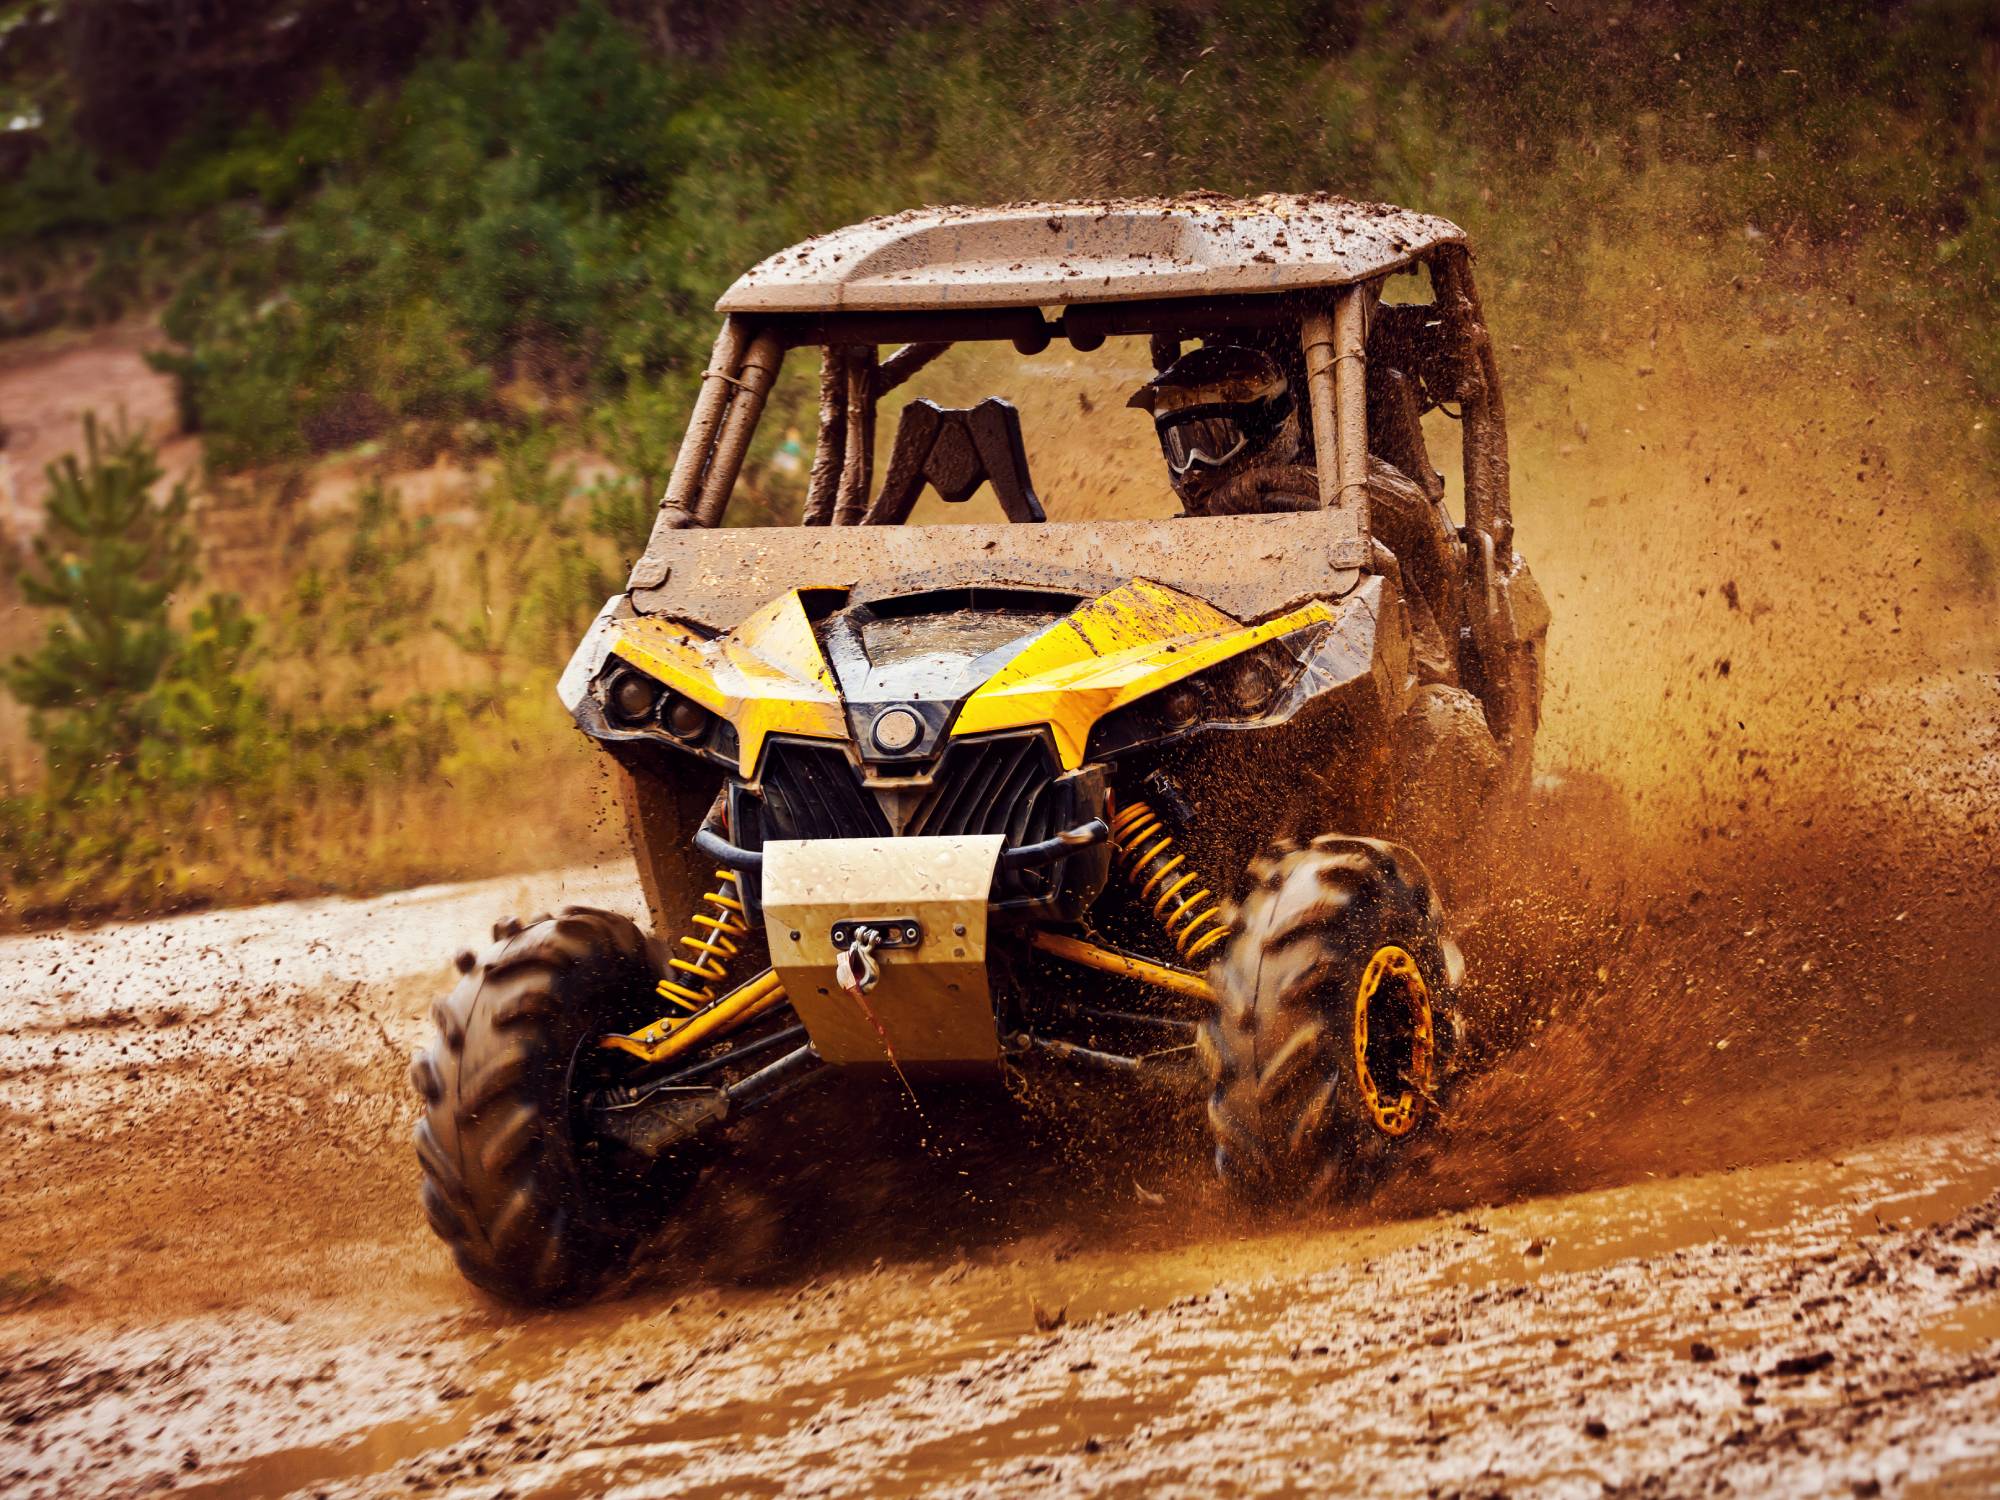 A driver wearing a helmet and goggles, riding in a yellow UTV, and kicking up mud and dirt on a rugged off-roading trail.